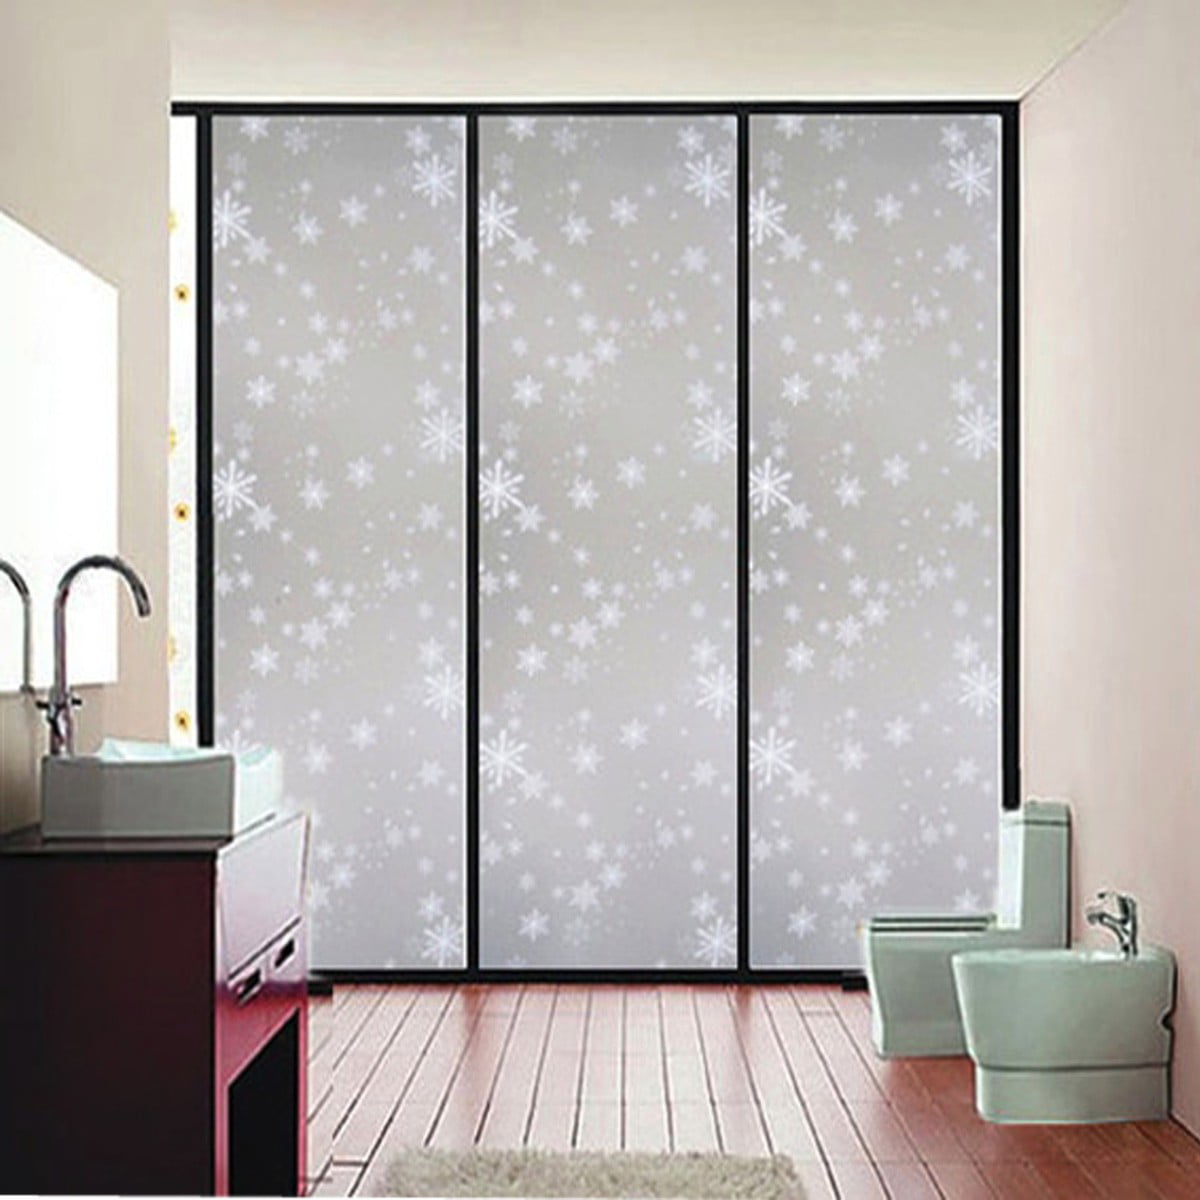 Waterproof Glass Frosted Bathroom Self Privacy window Sticker Film Adhesive 